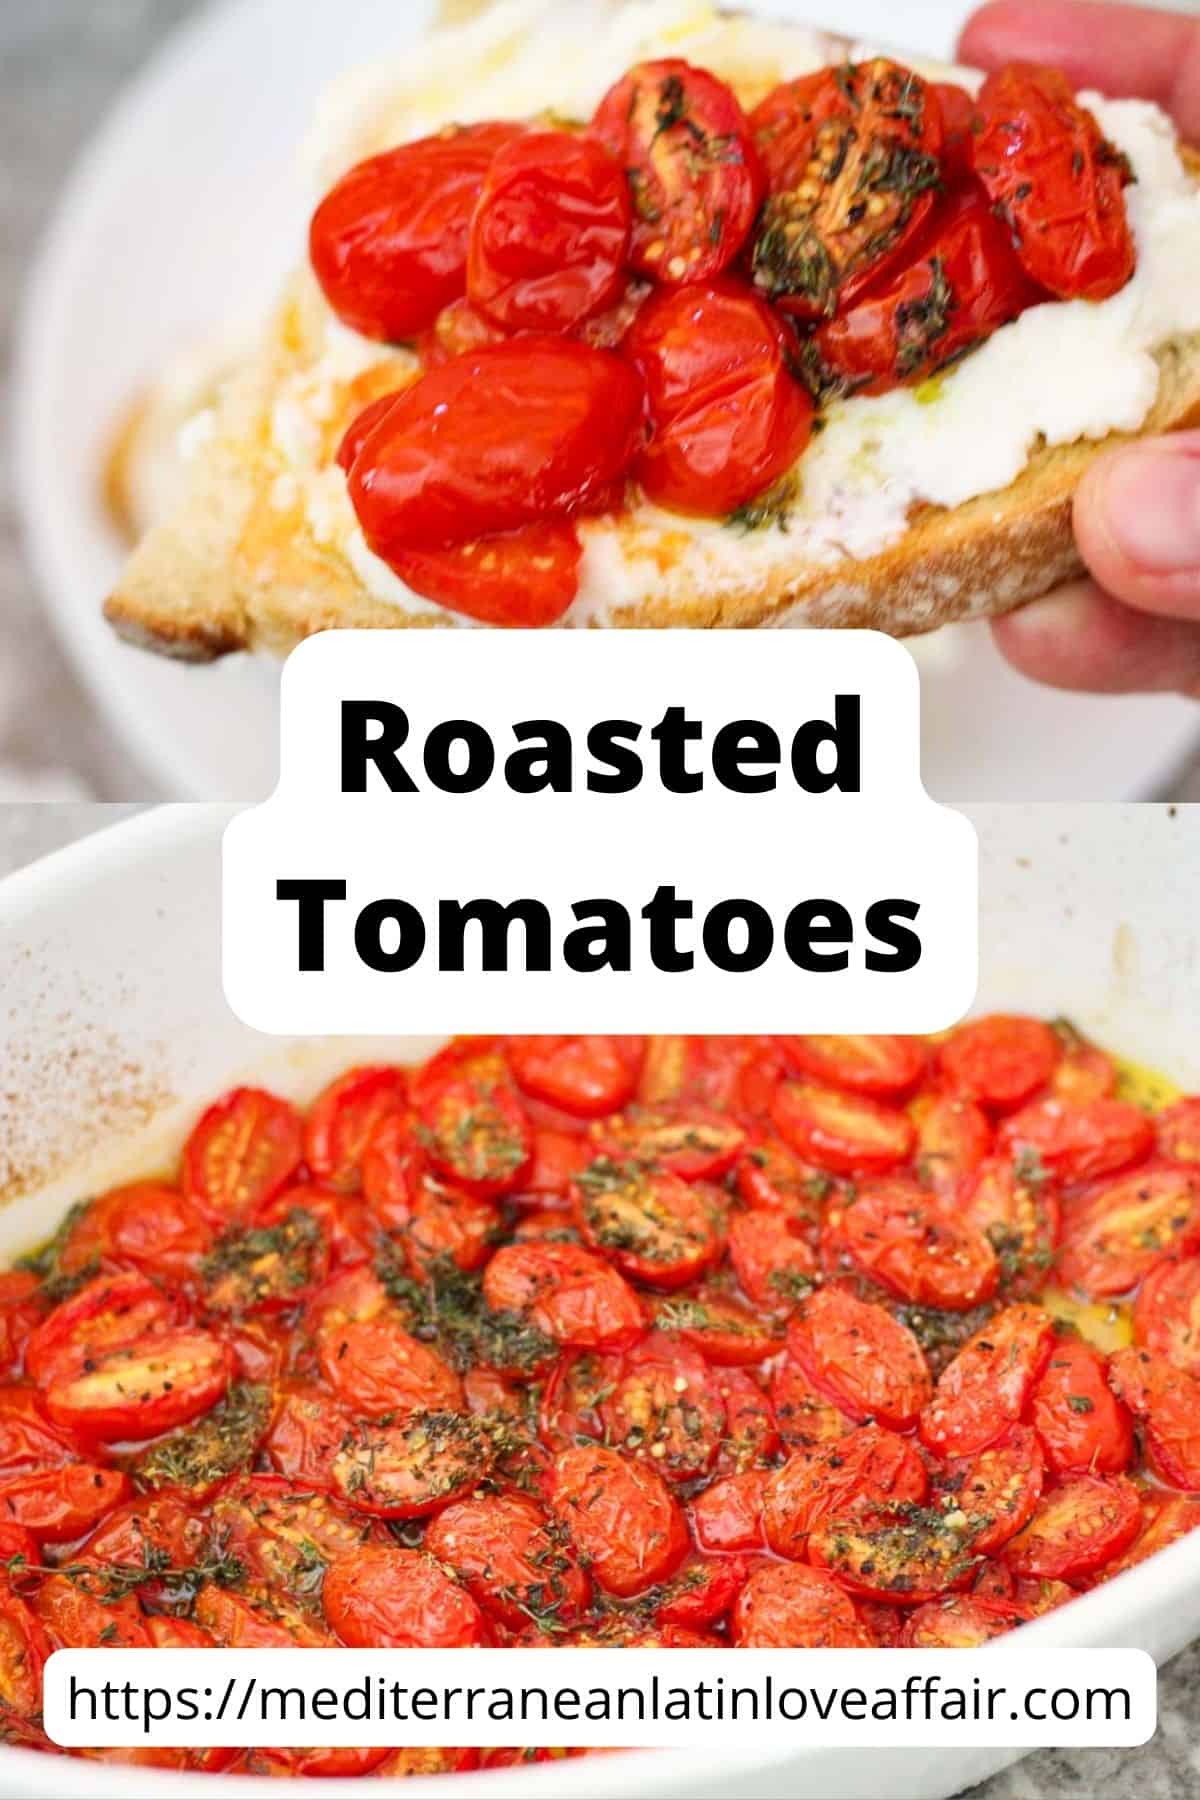 An image prepared for Pinterest. It shows two pictures, the top one is a ricotta toast topped with roasted tomatoes. While the bottom picture shows roasted tomatoes in a baking tray. There's a title bar in between both pictures and the website link on the bottom.